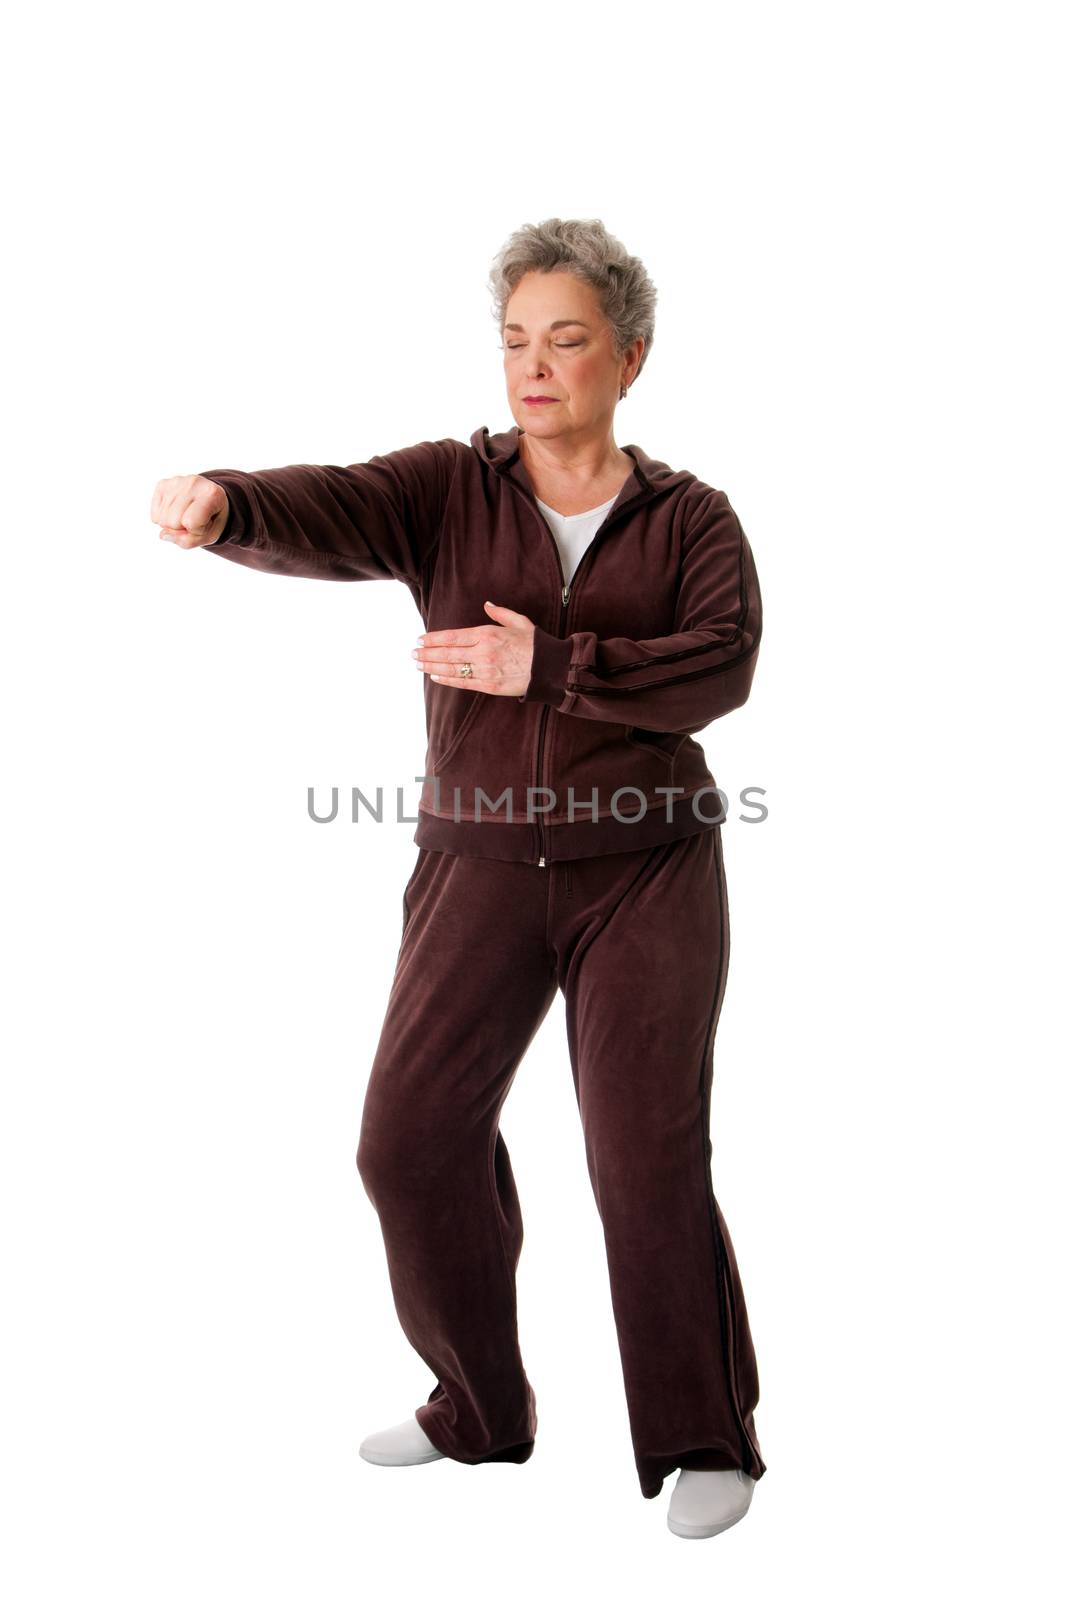 Beautiful Senior woman doing Tai Chi punching exercise to keep her joints flexible, isolated.